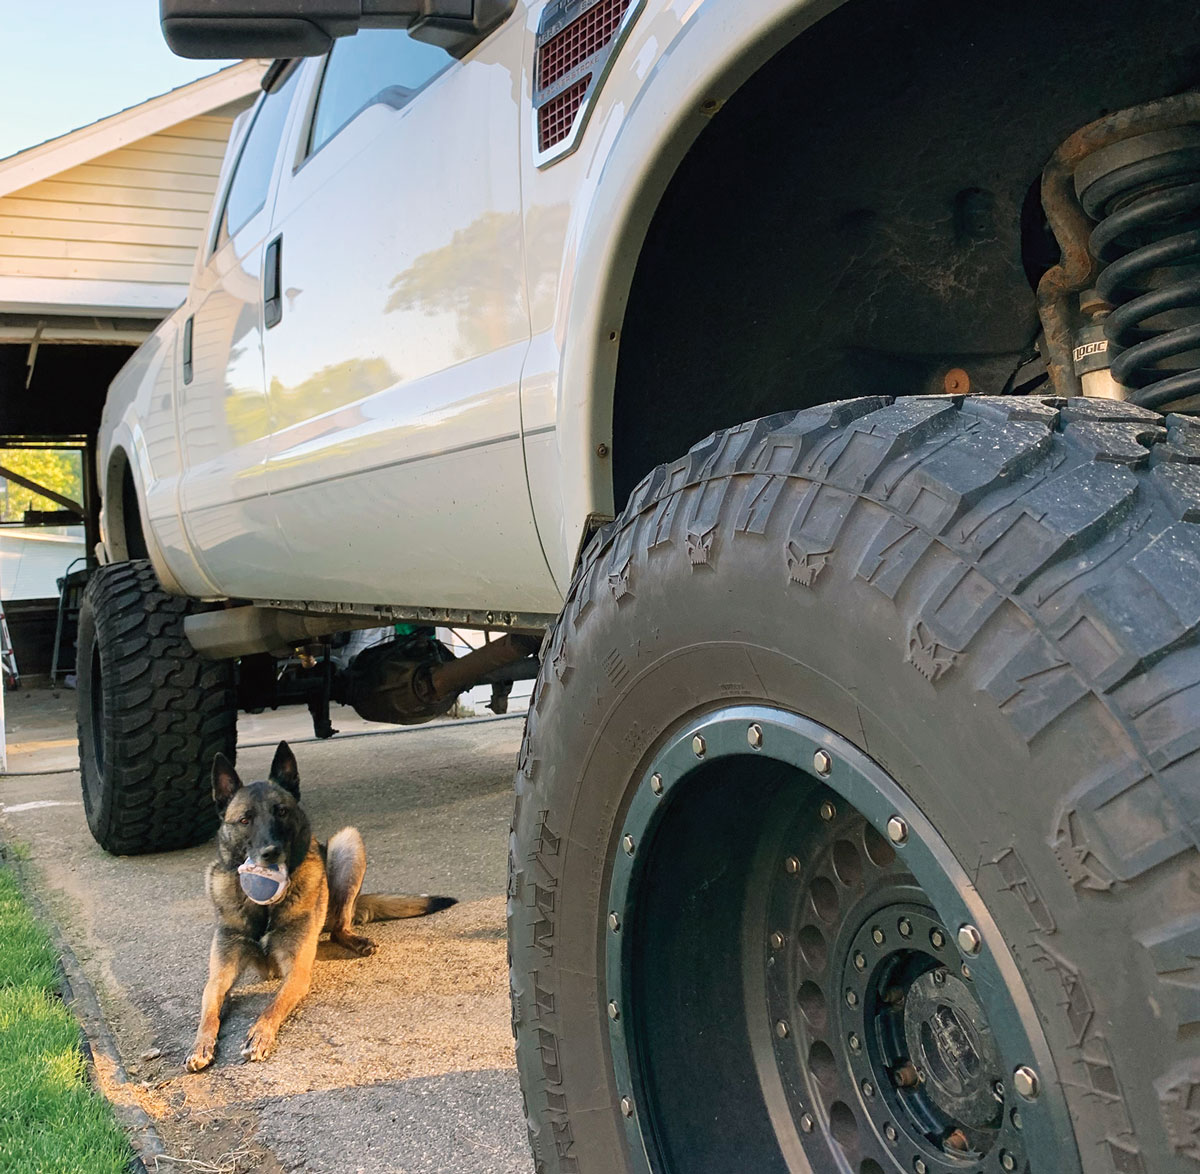 Courtney Craven’s F350 and her dog sitting next to it